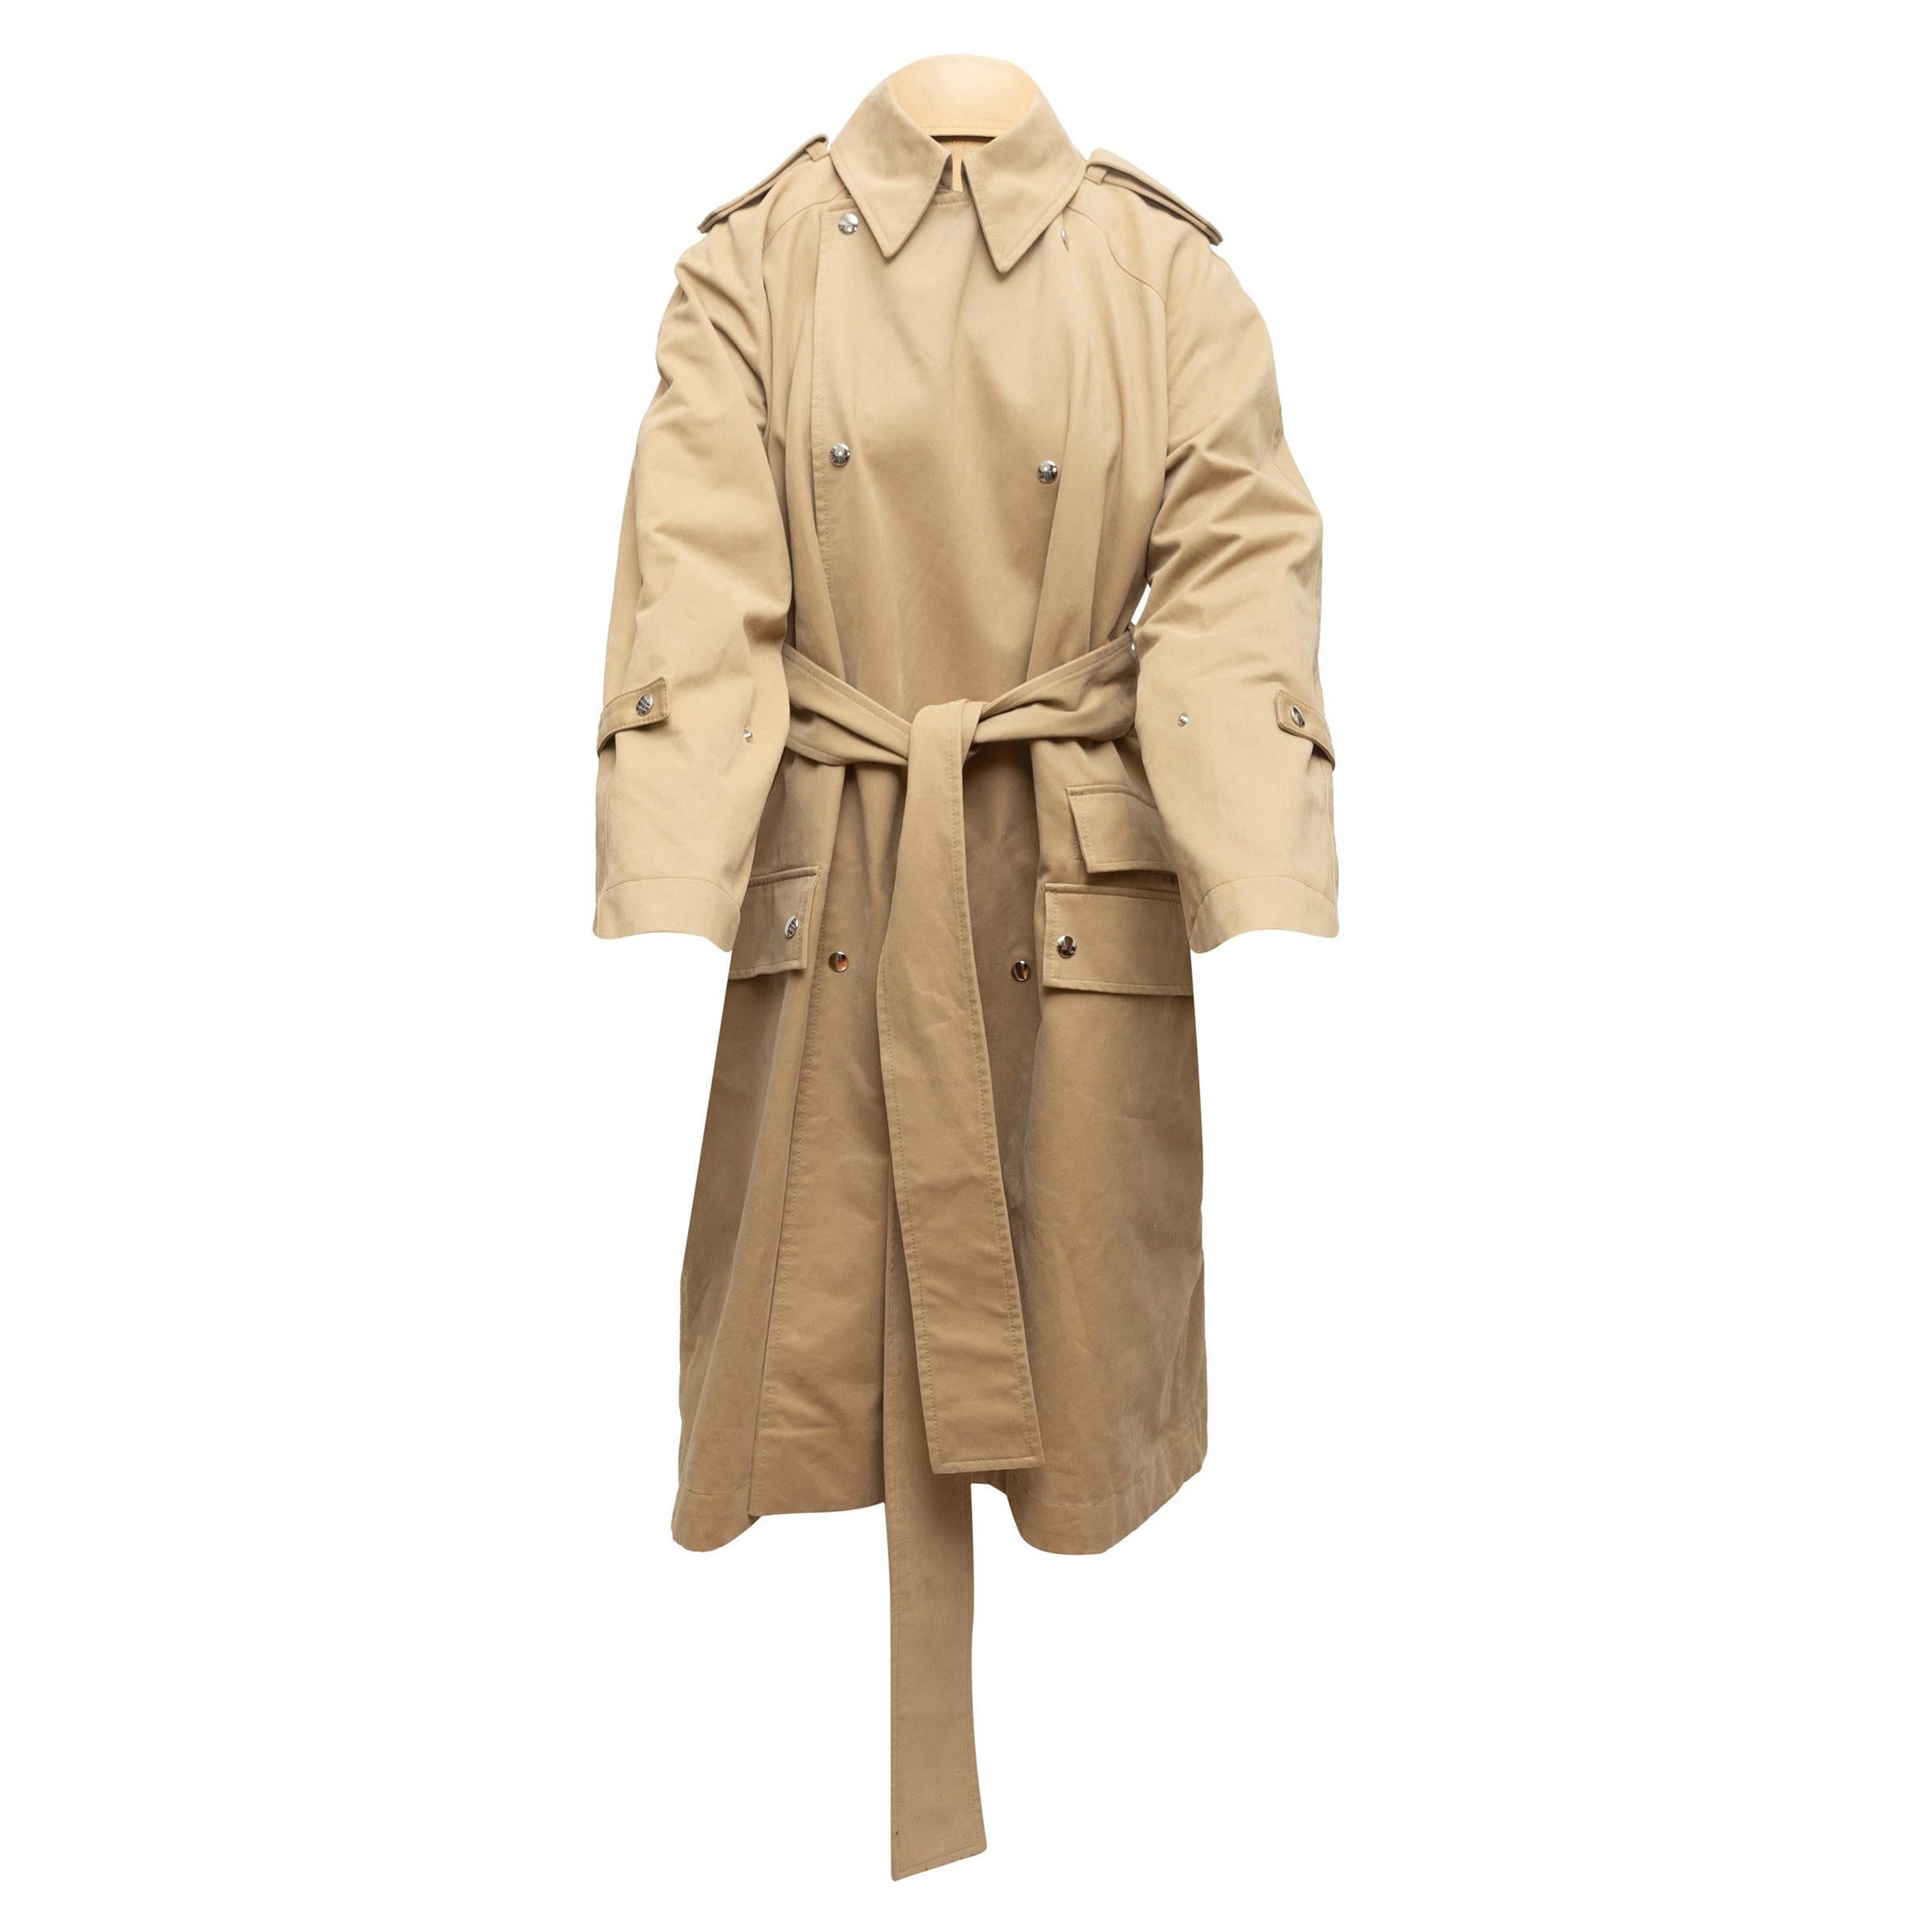 Acne Studios Tan Double-Breasted Trench Coat